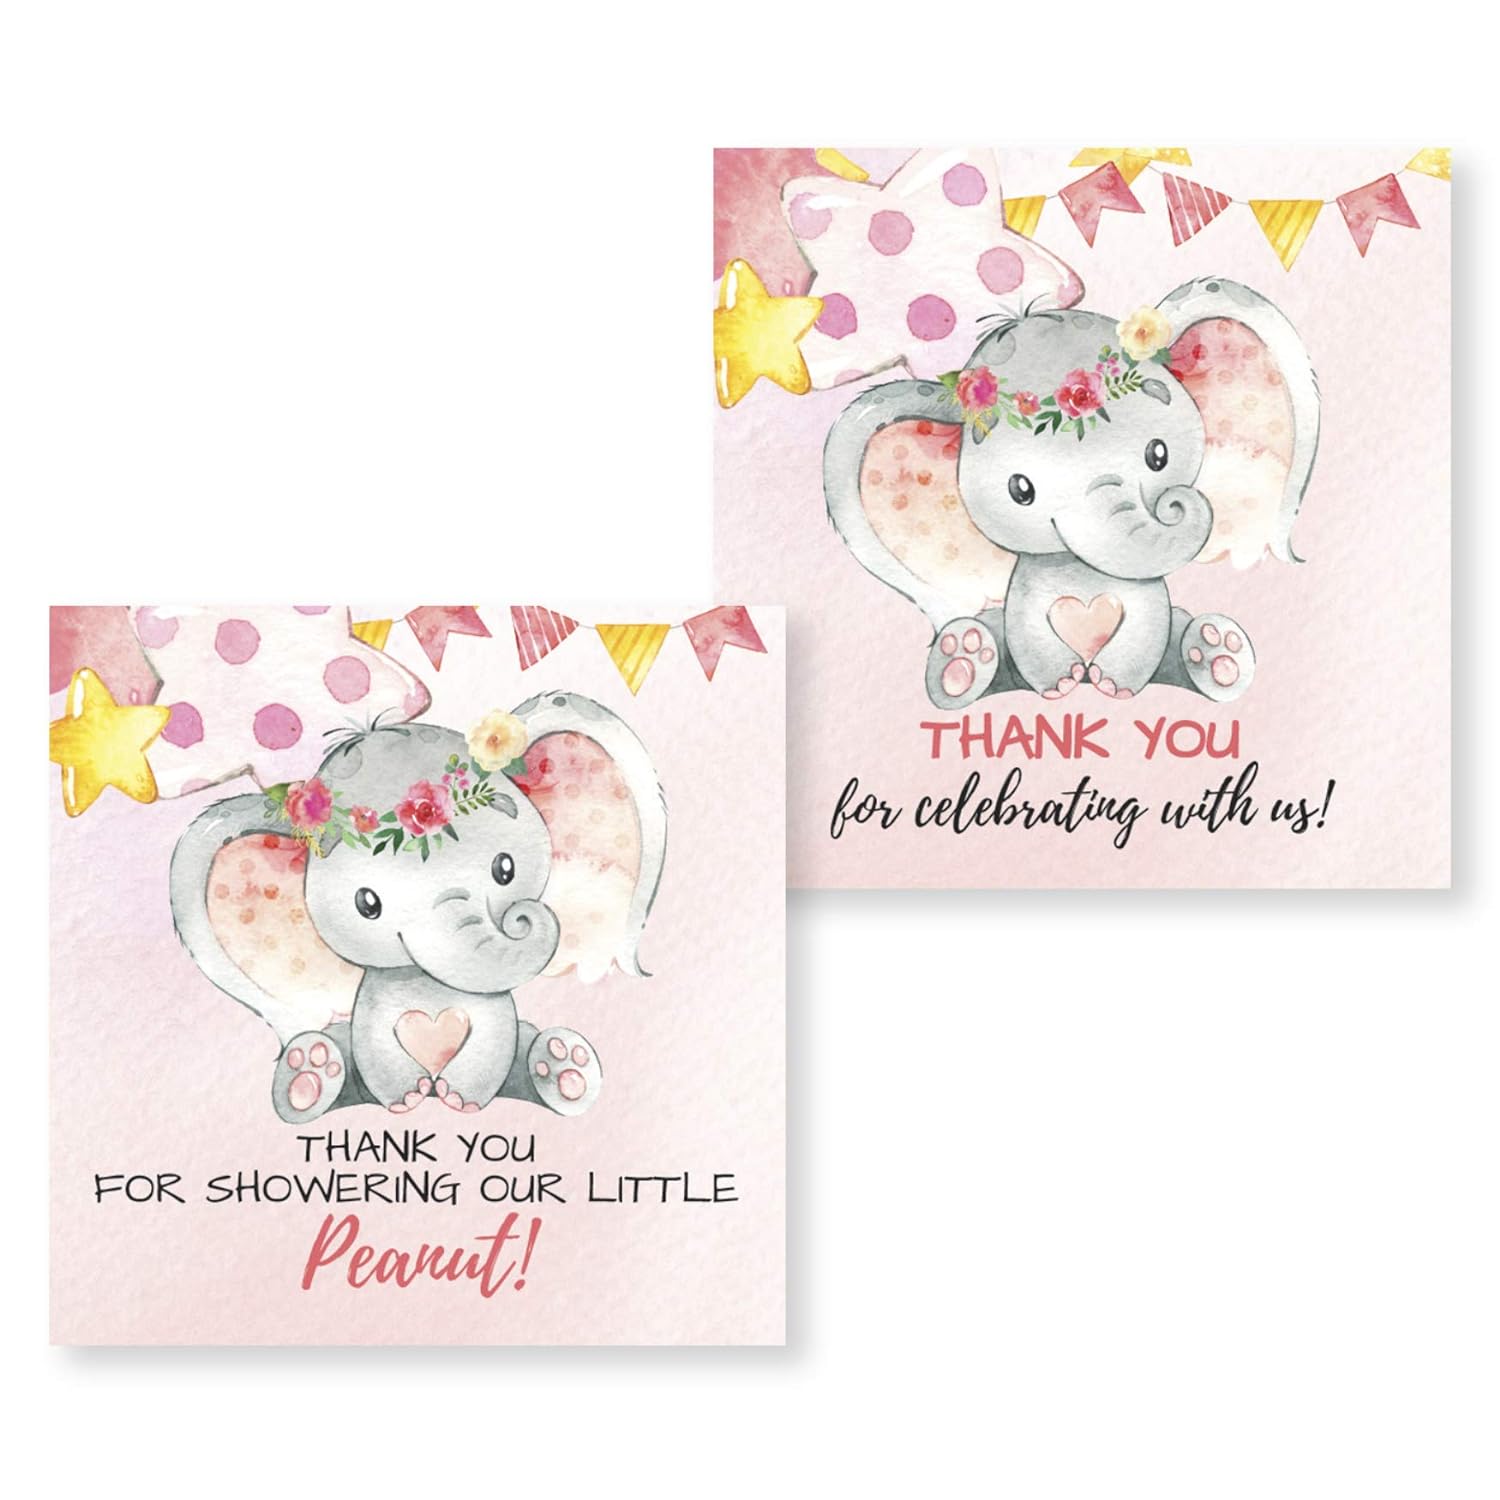 EBD Products 50-2 Inch Thank You Baby Shower Or Gender Reveal Elephant Stickers Pink & Gray Perfect For Thank You Card Envelopes, Par?